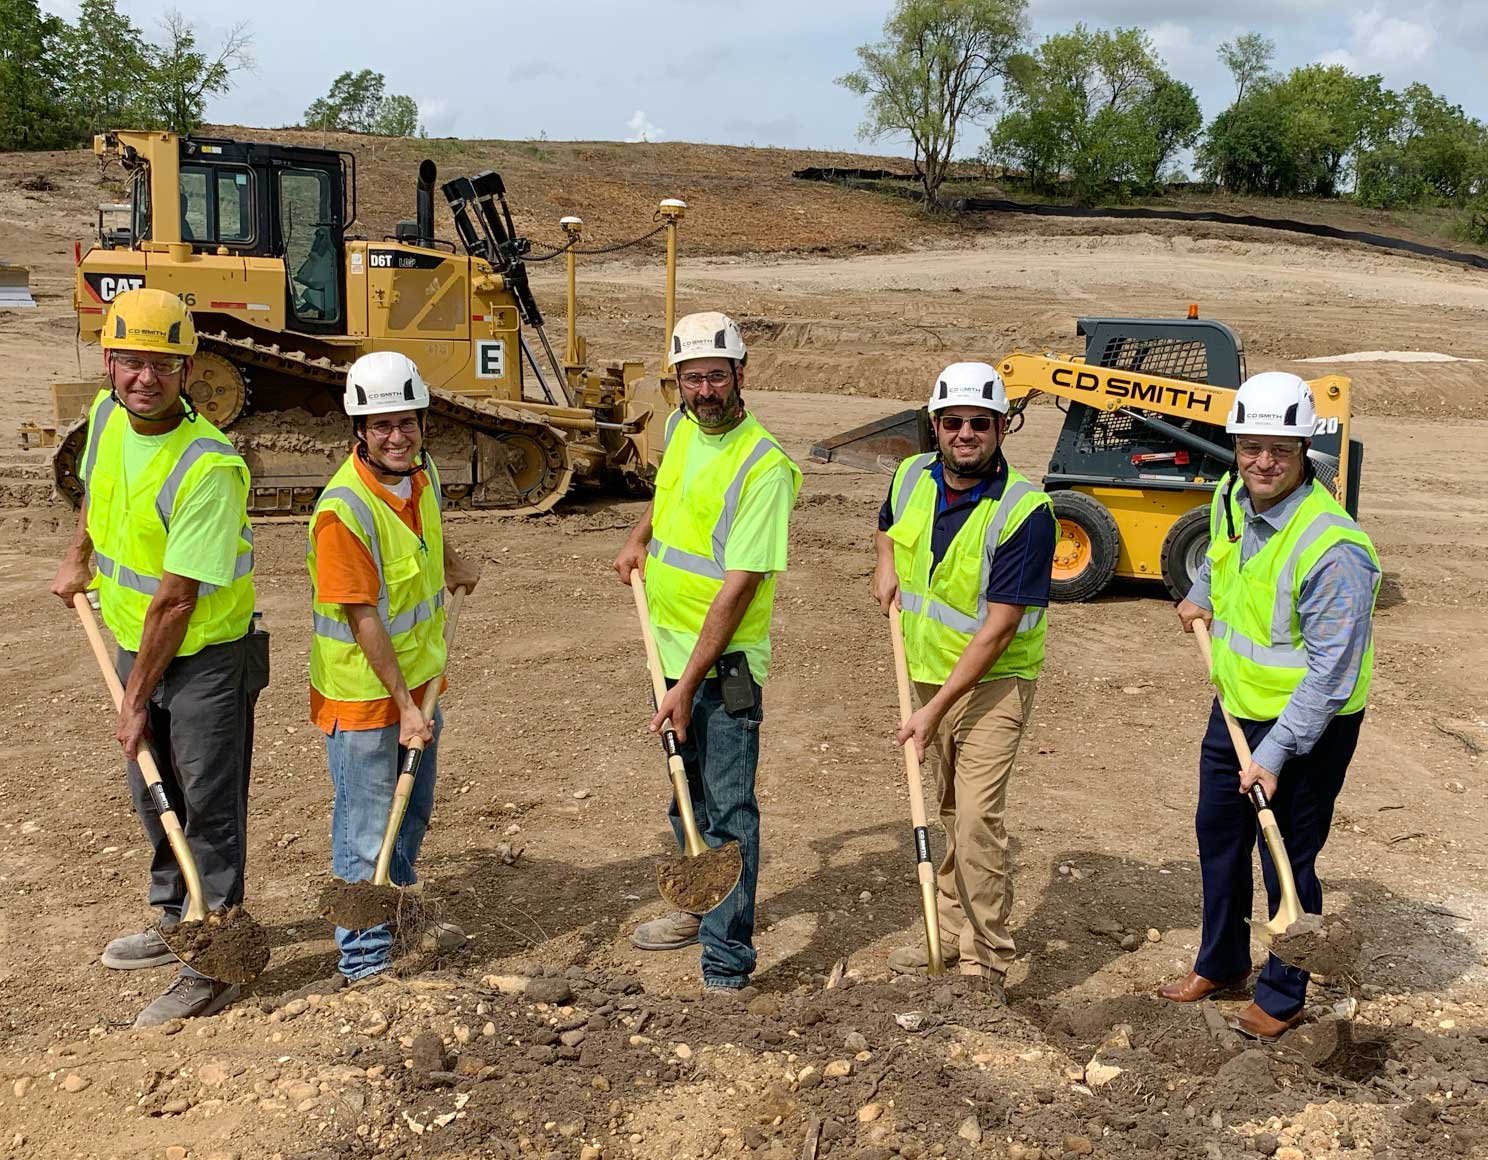 C.D. Smith Construction crew shoveling dirt at groundbreaking event at Waukesha Booster Pumping Station site